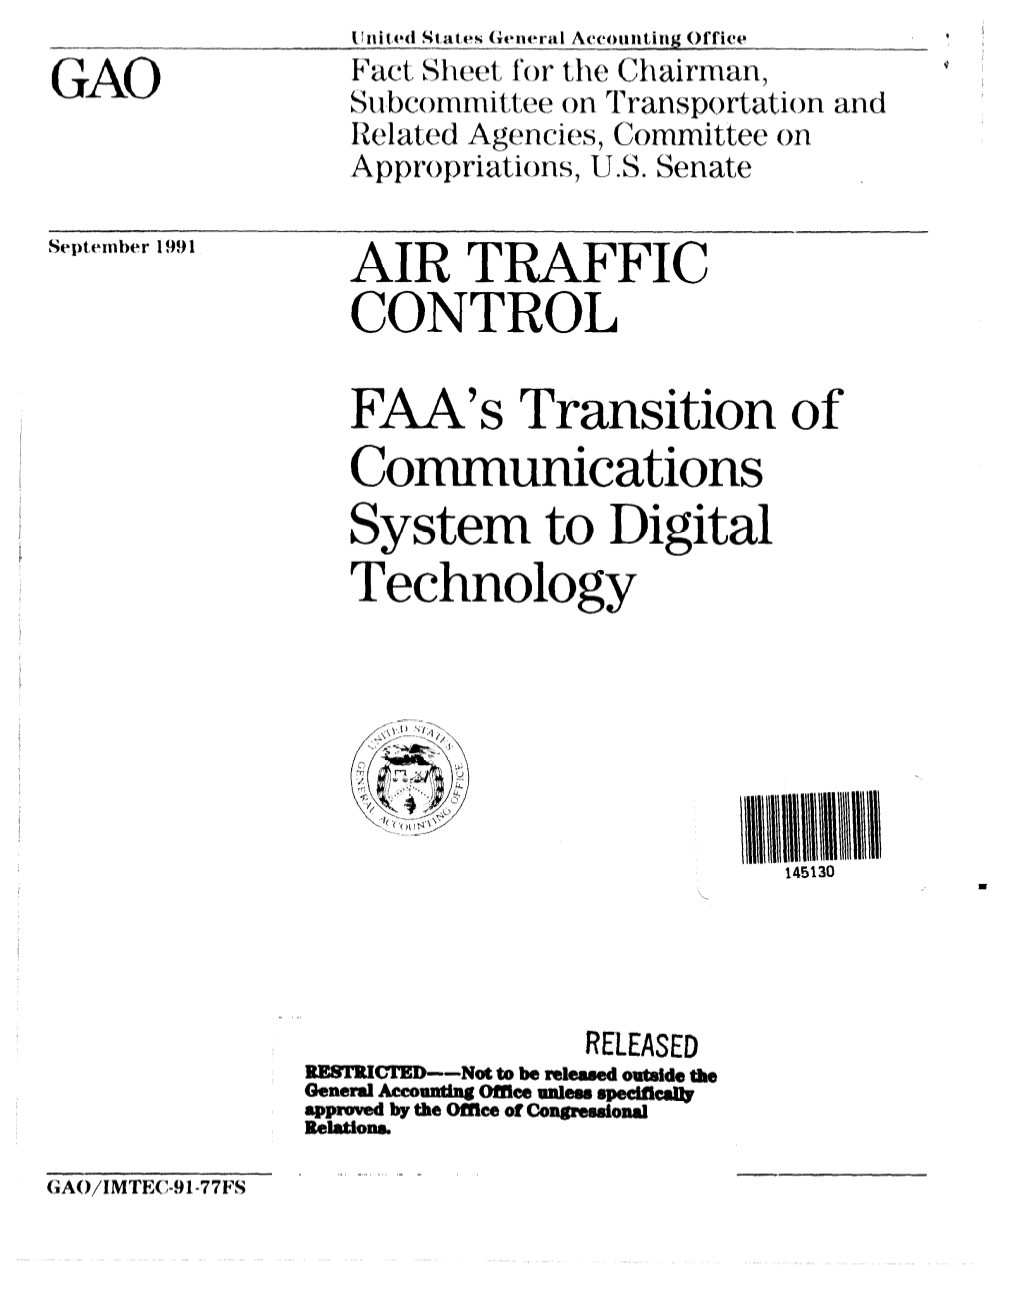 FAA's Transition of Communications